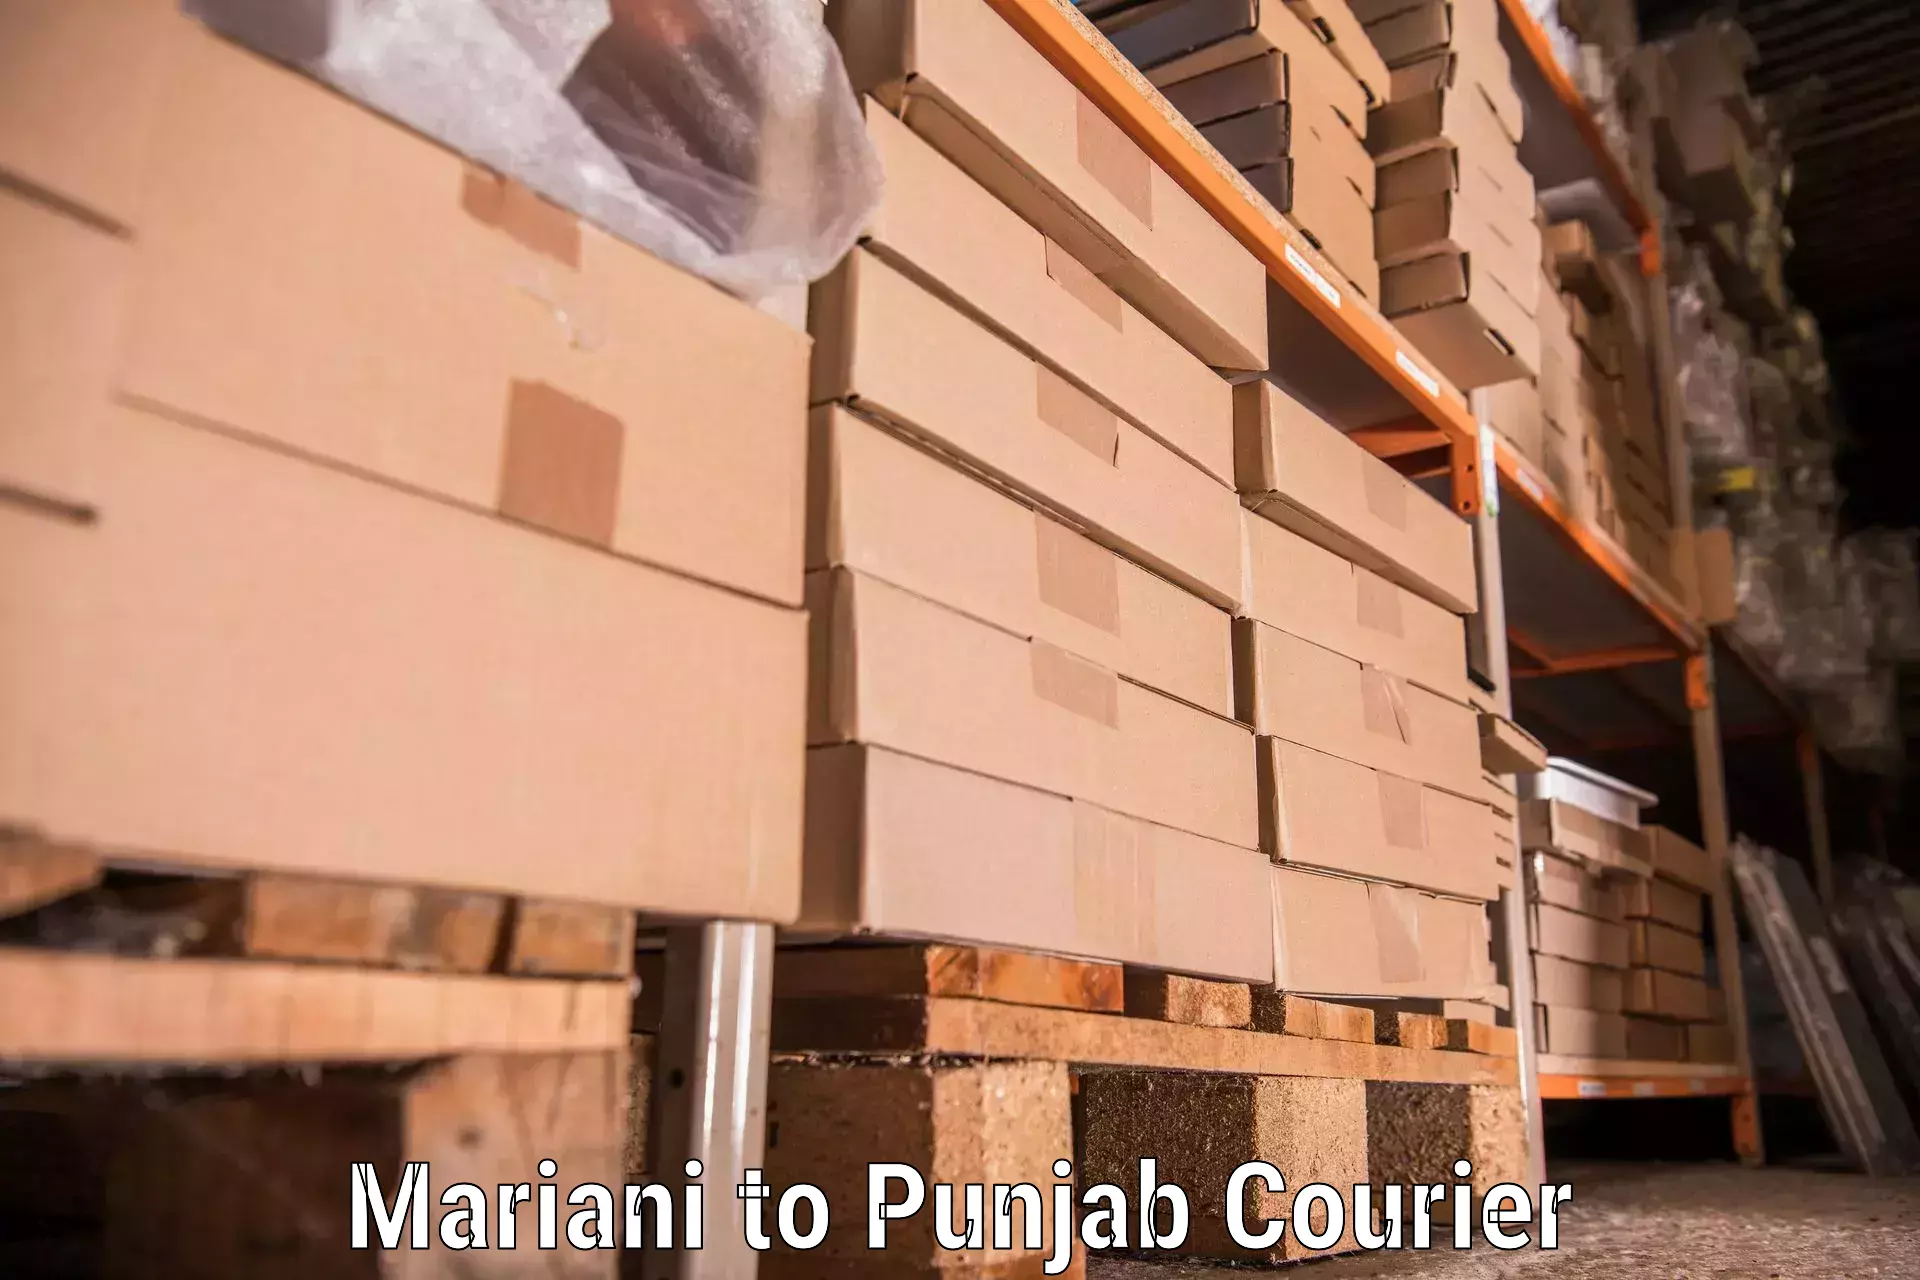 Moving and packing experts Mariani to Punjab